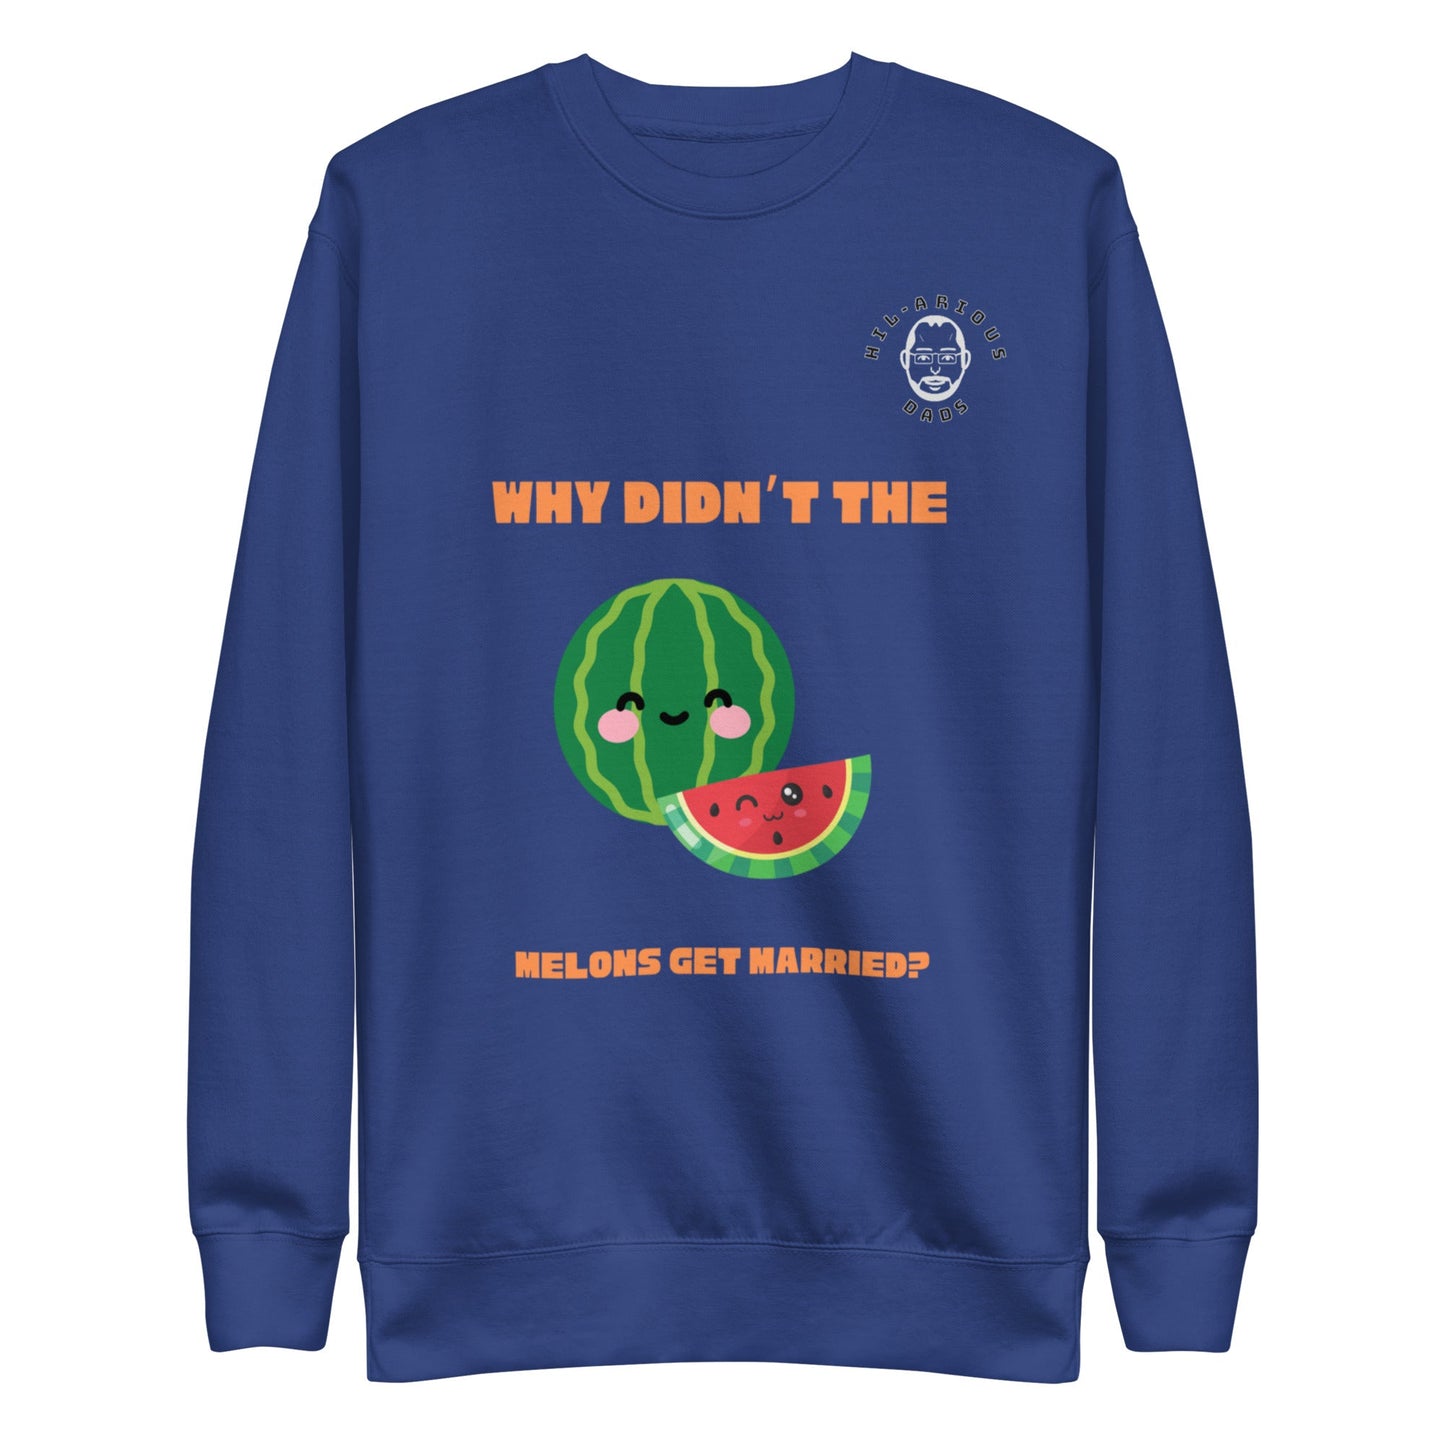 Why didn’t the melons get married?-Sweatshirt - Hil-arious Dads